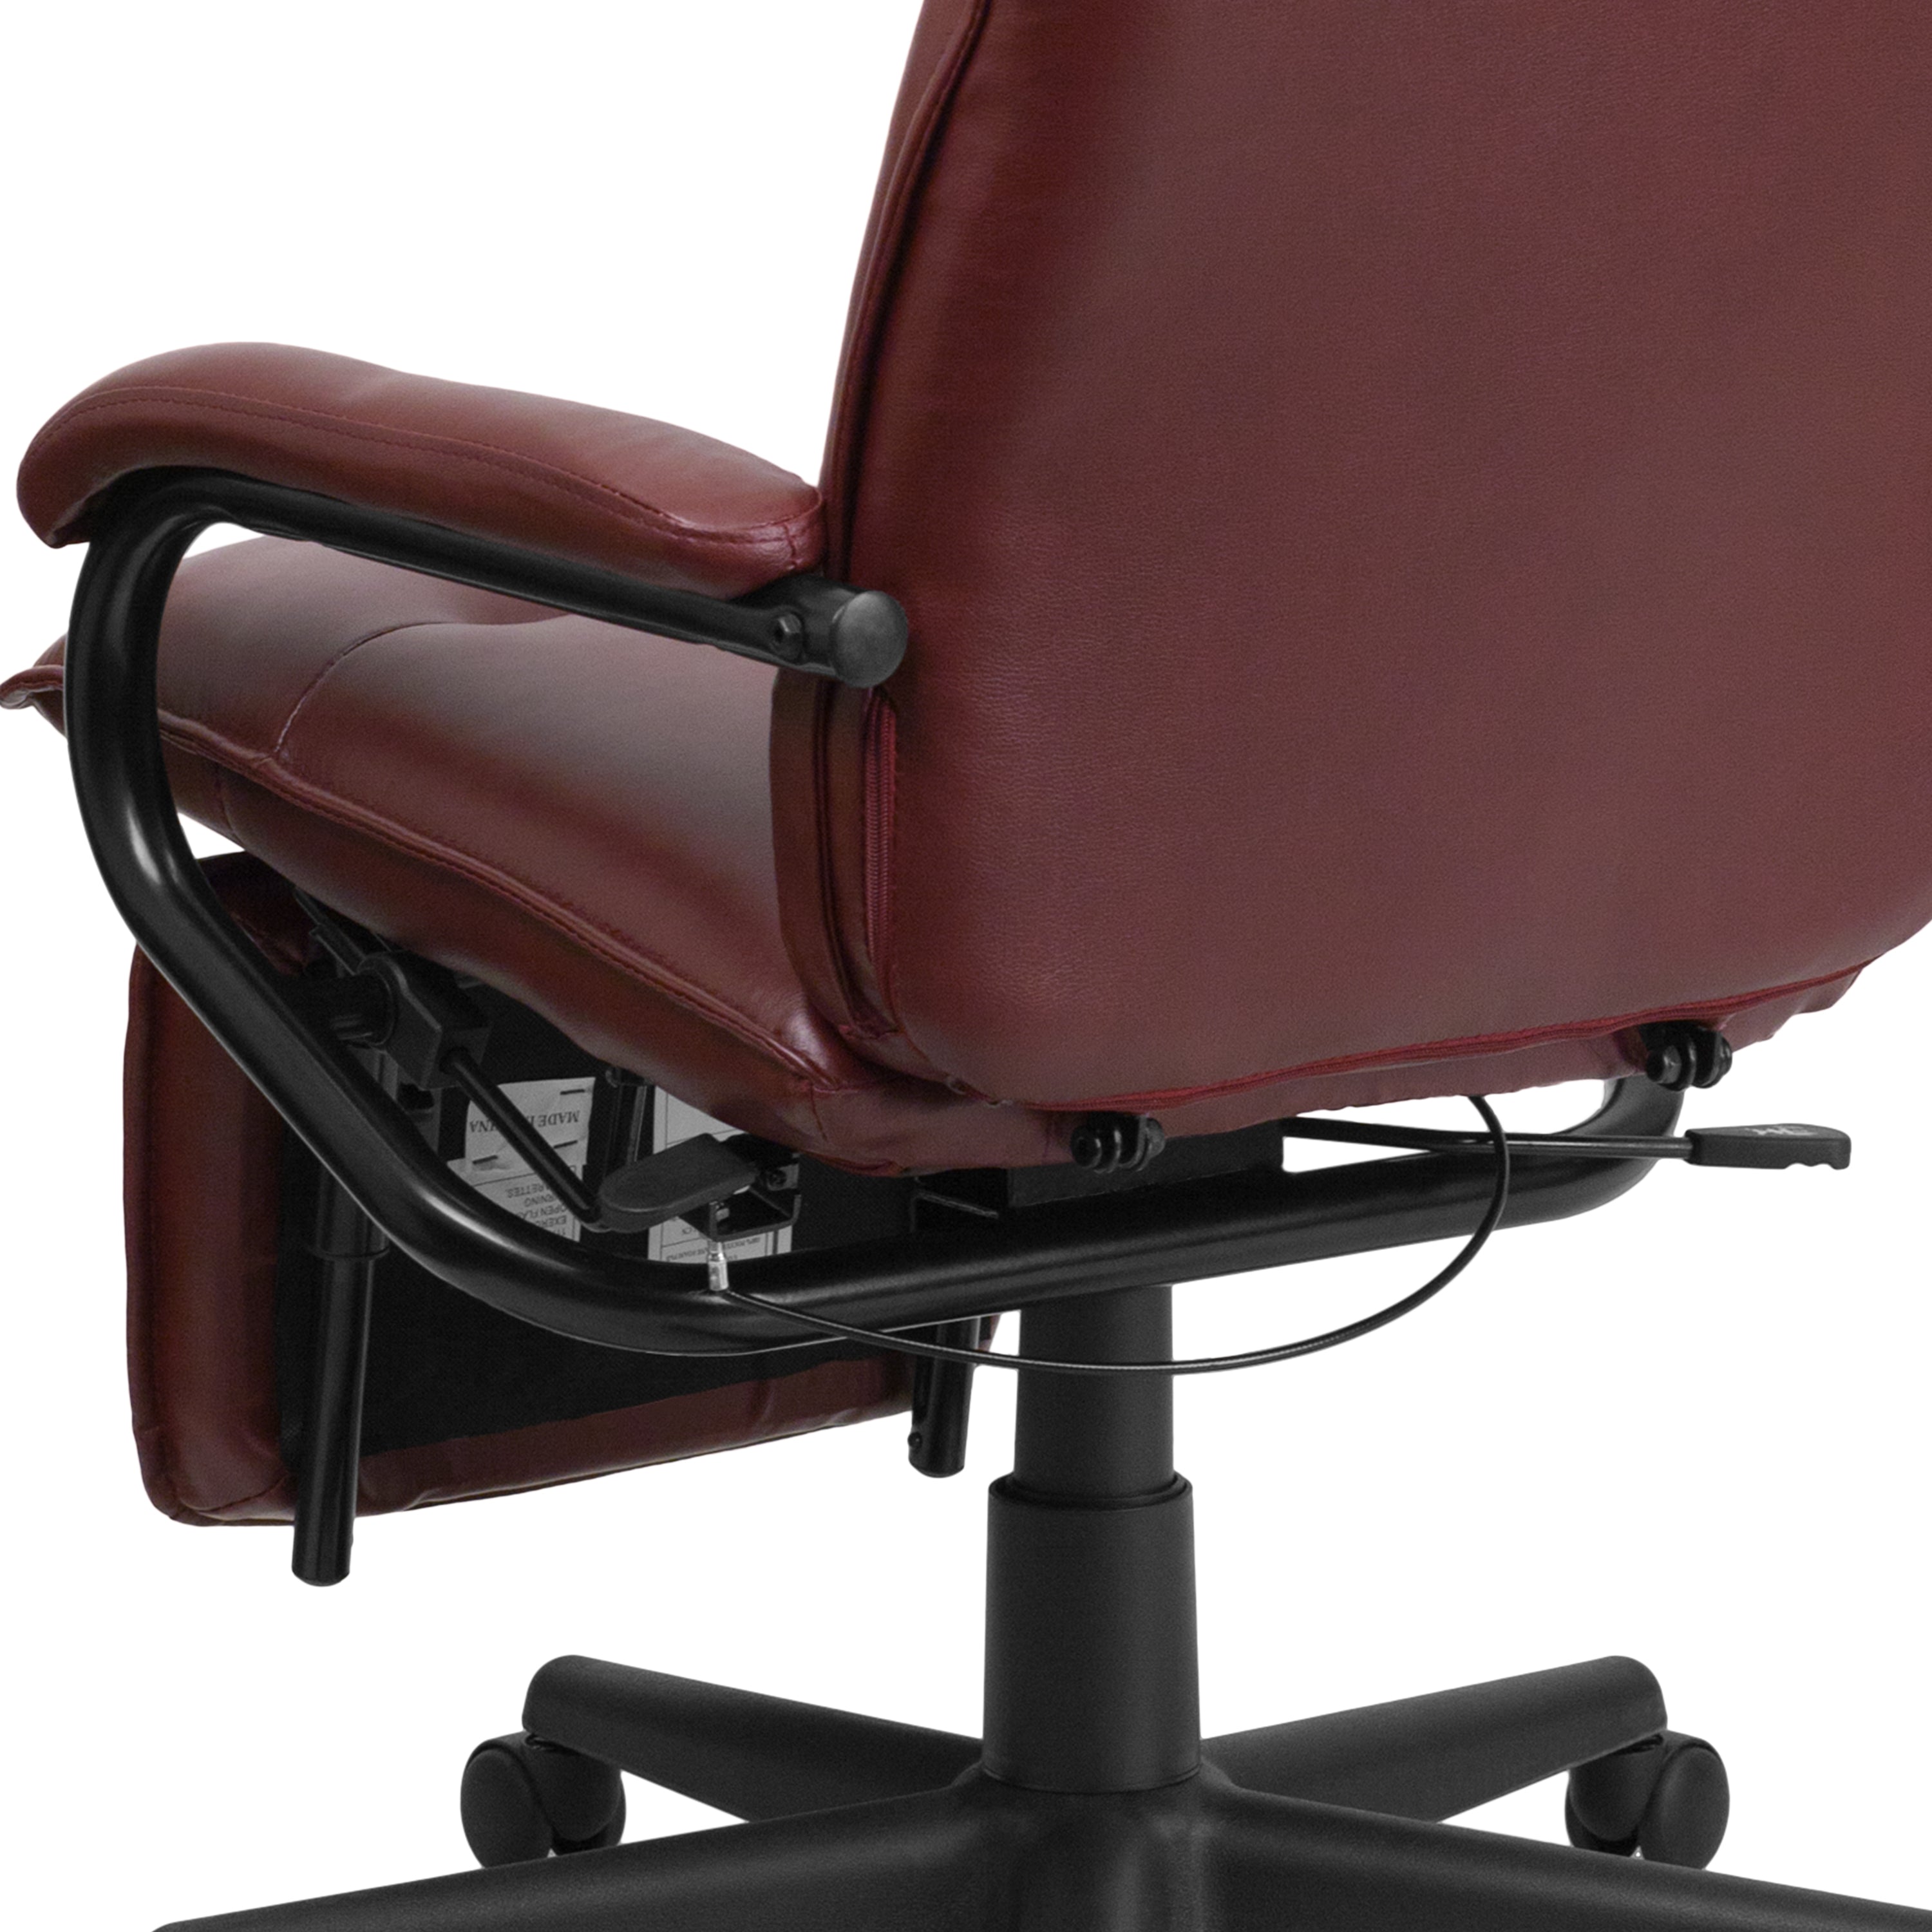 High Back LeatherSoft Executive Reclining Ergonomic Swivel Office Chair with Arms-Office Chair-Flash Furniture-Wall2Wall Furnishings